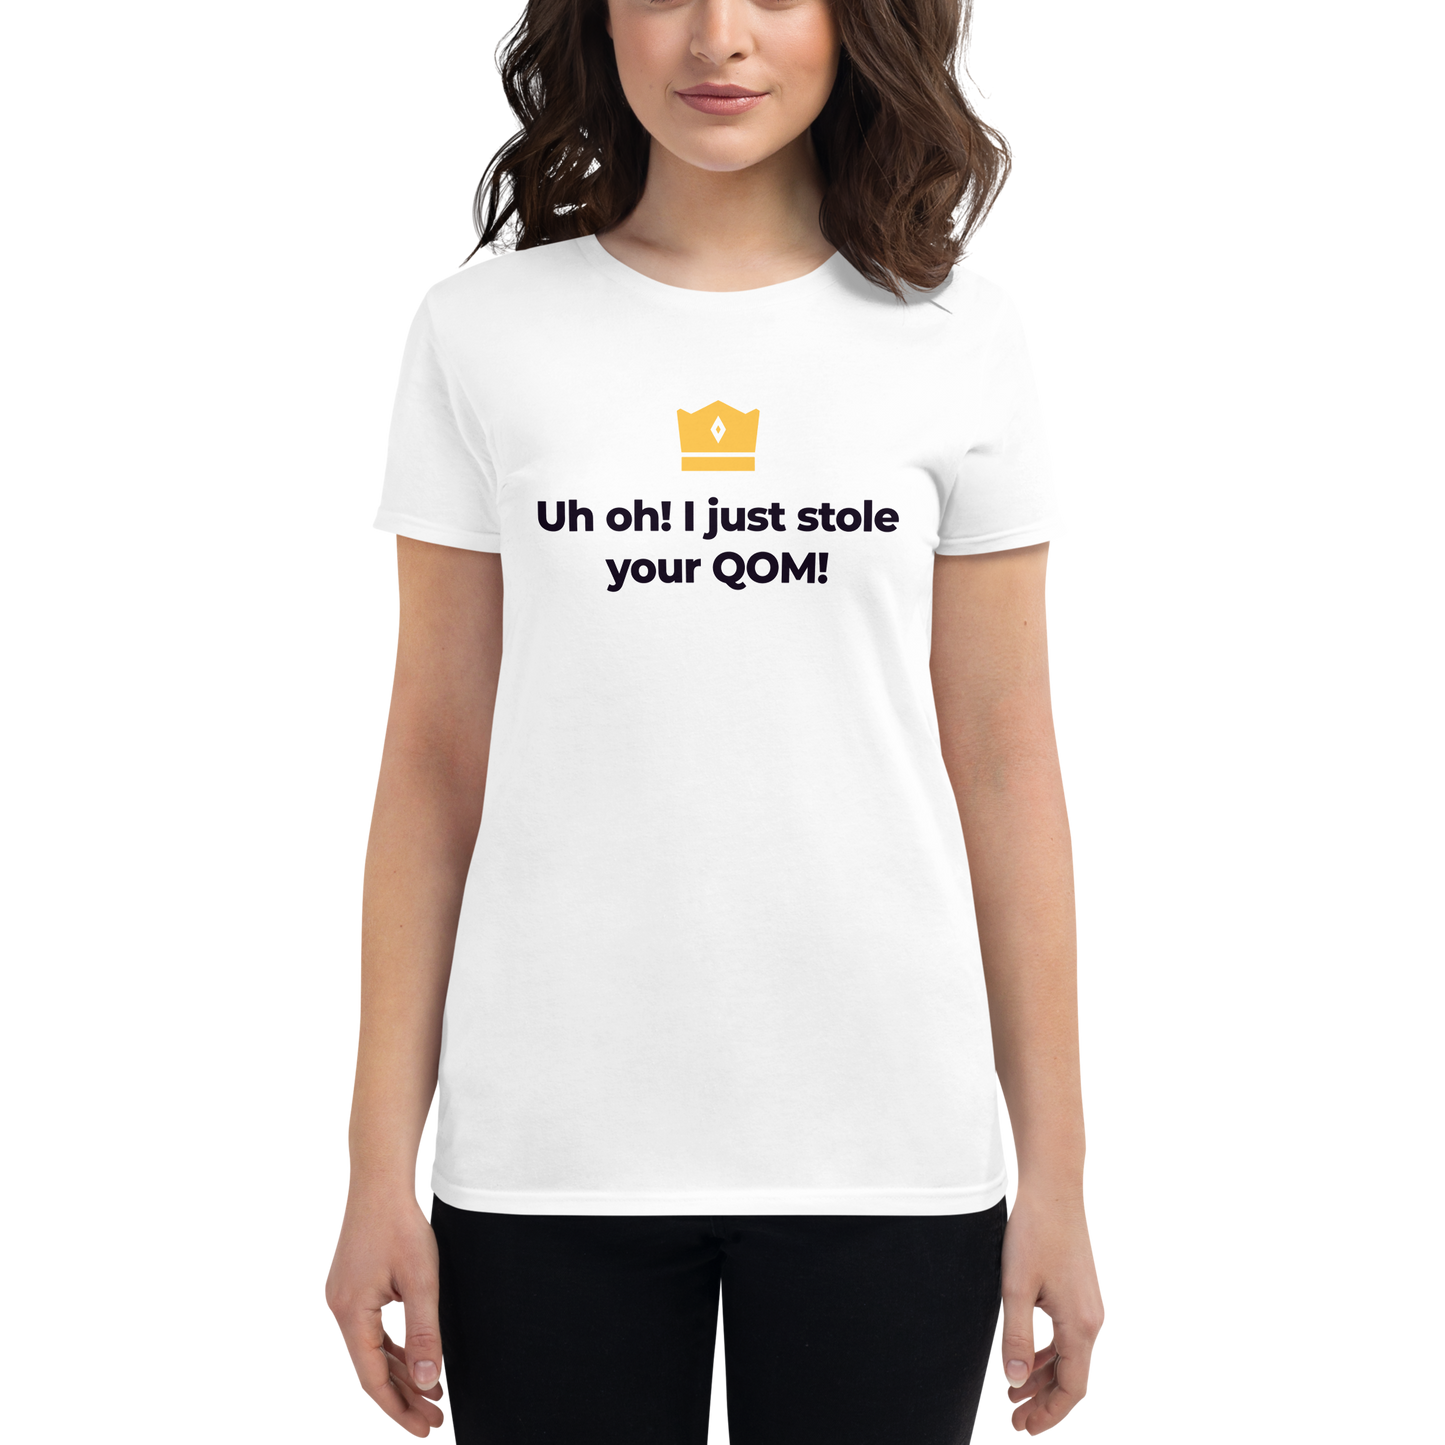 Uh oh! I just stole your QOM! Women's short sleeve t-shirt